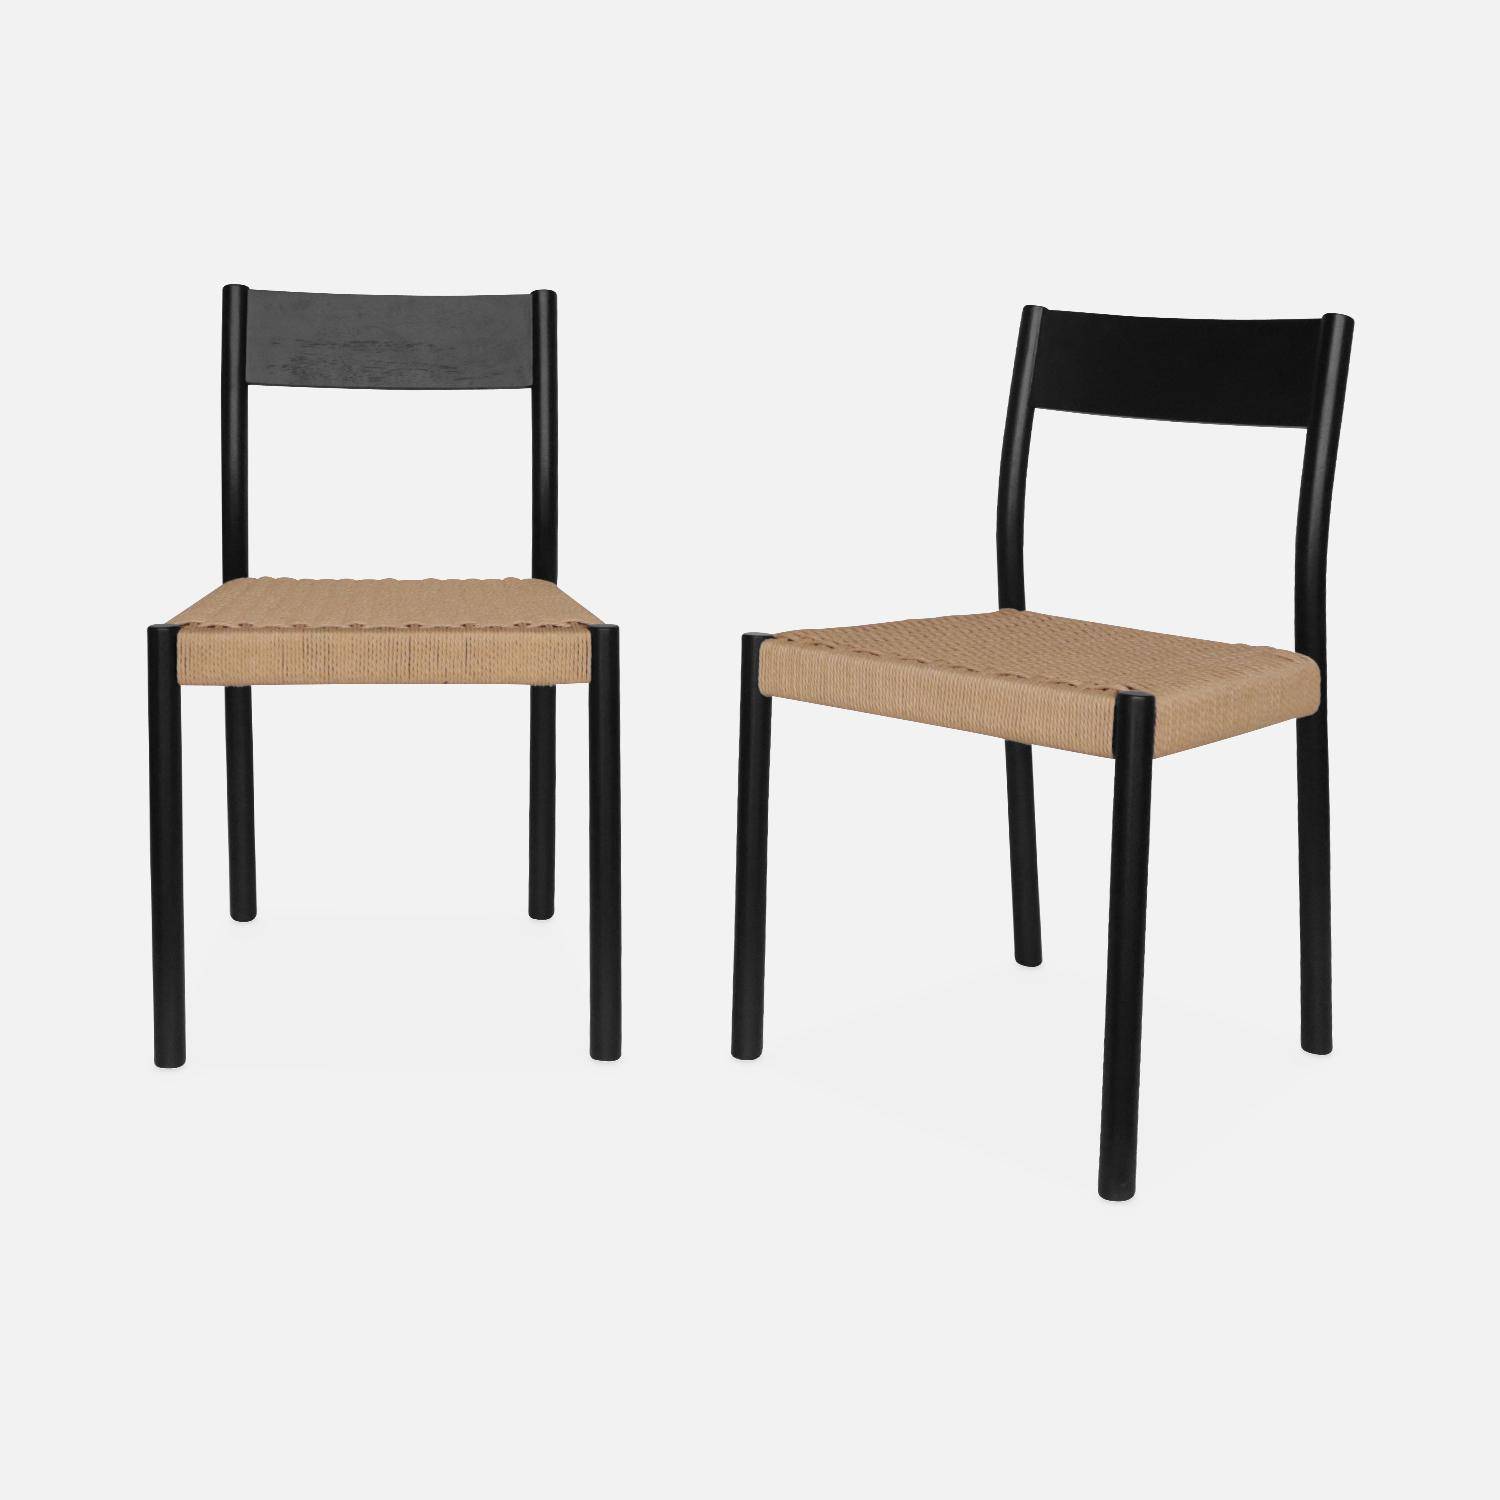 Pair of timeless design Wood and Rope Dining Room chairs, L49.5 x W53 x H82 cm, black Photo4